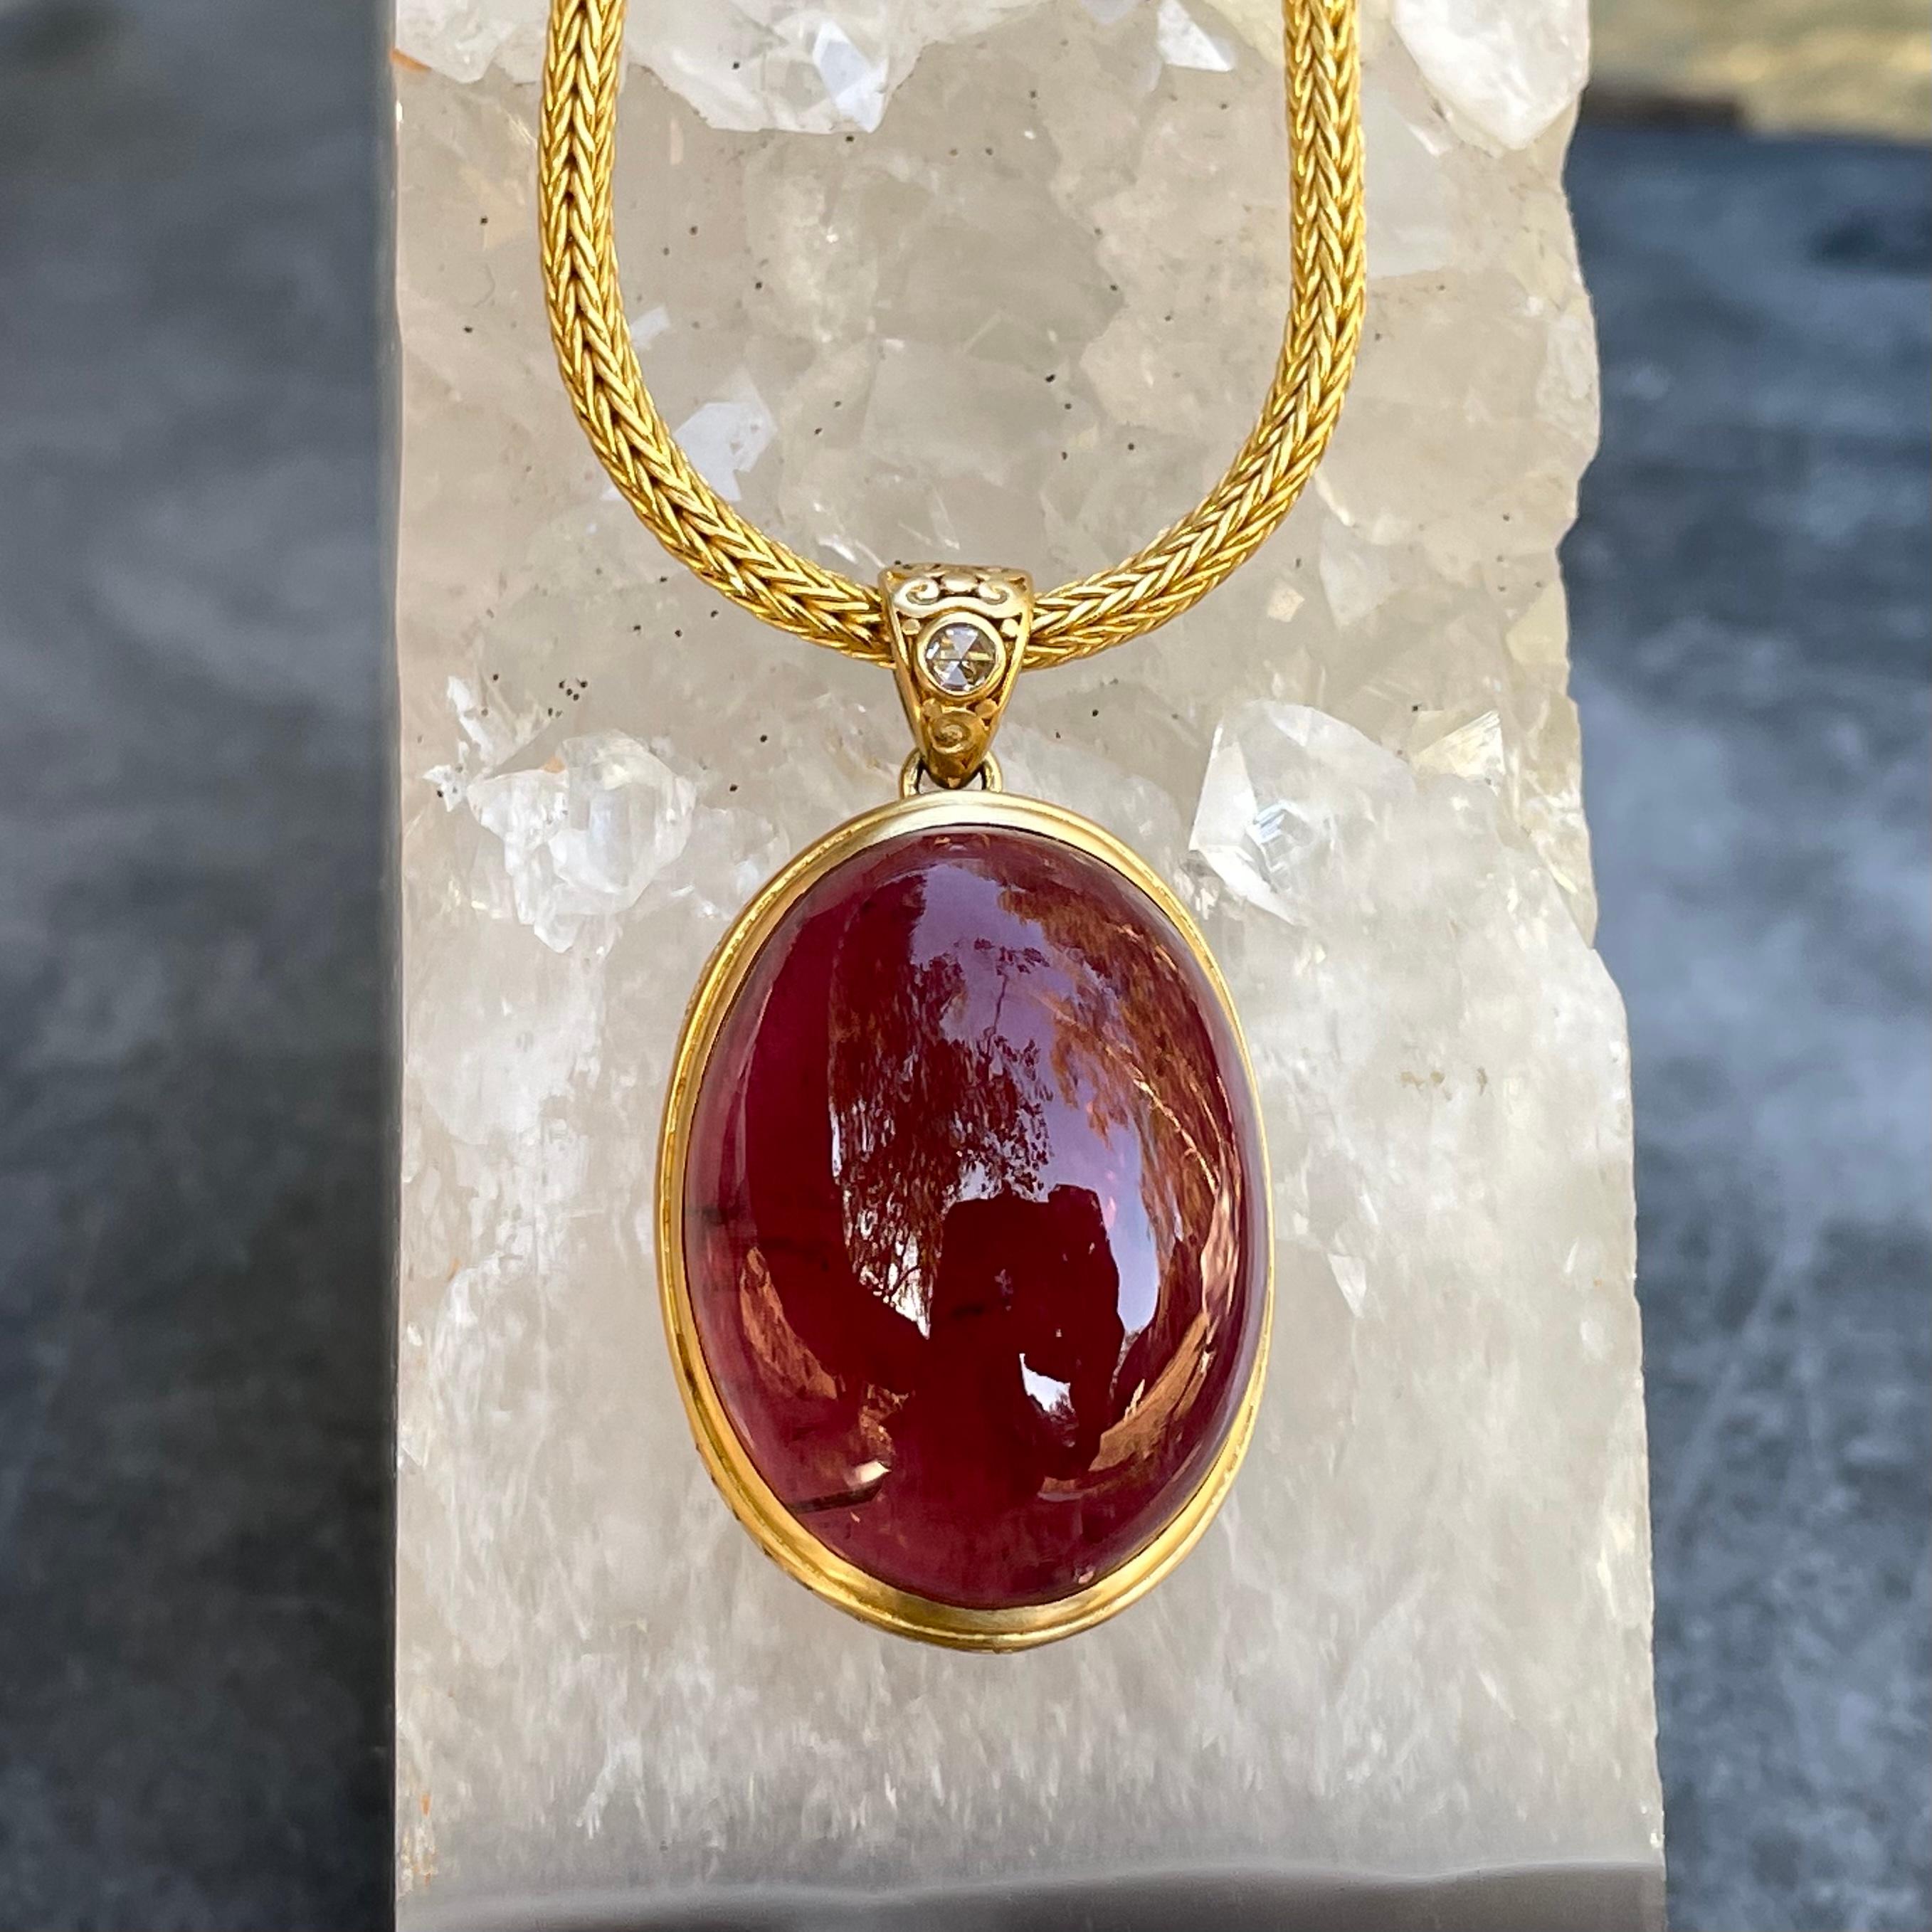 88.7 Carat Pink Tourmaline Cabochon Diamond 18K Gold Pendant In New Condition For Sale In Soquel, CA